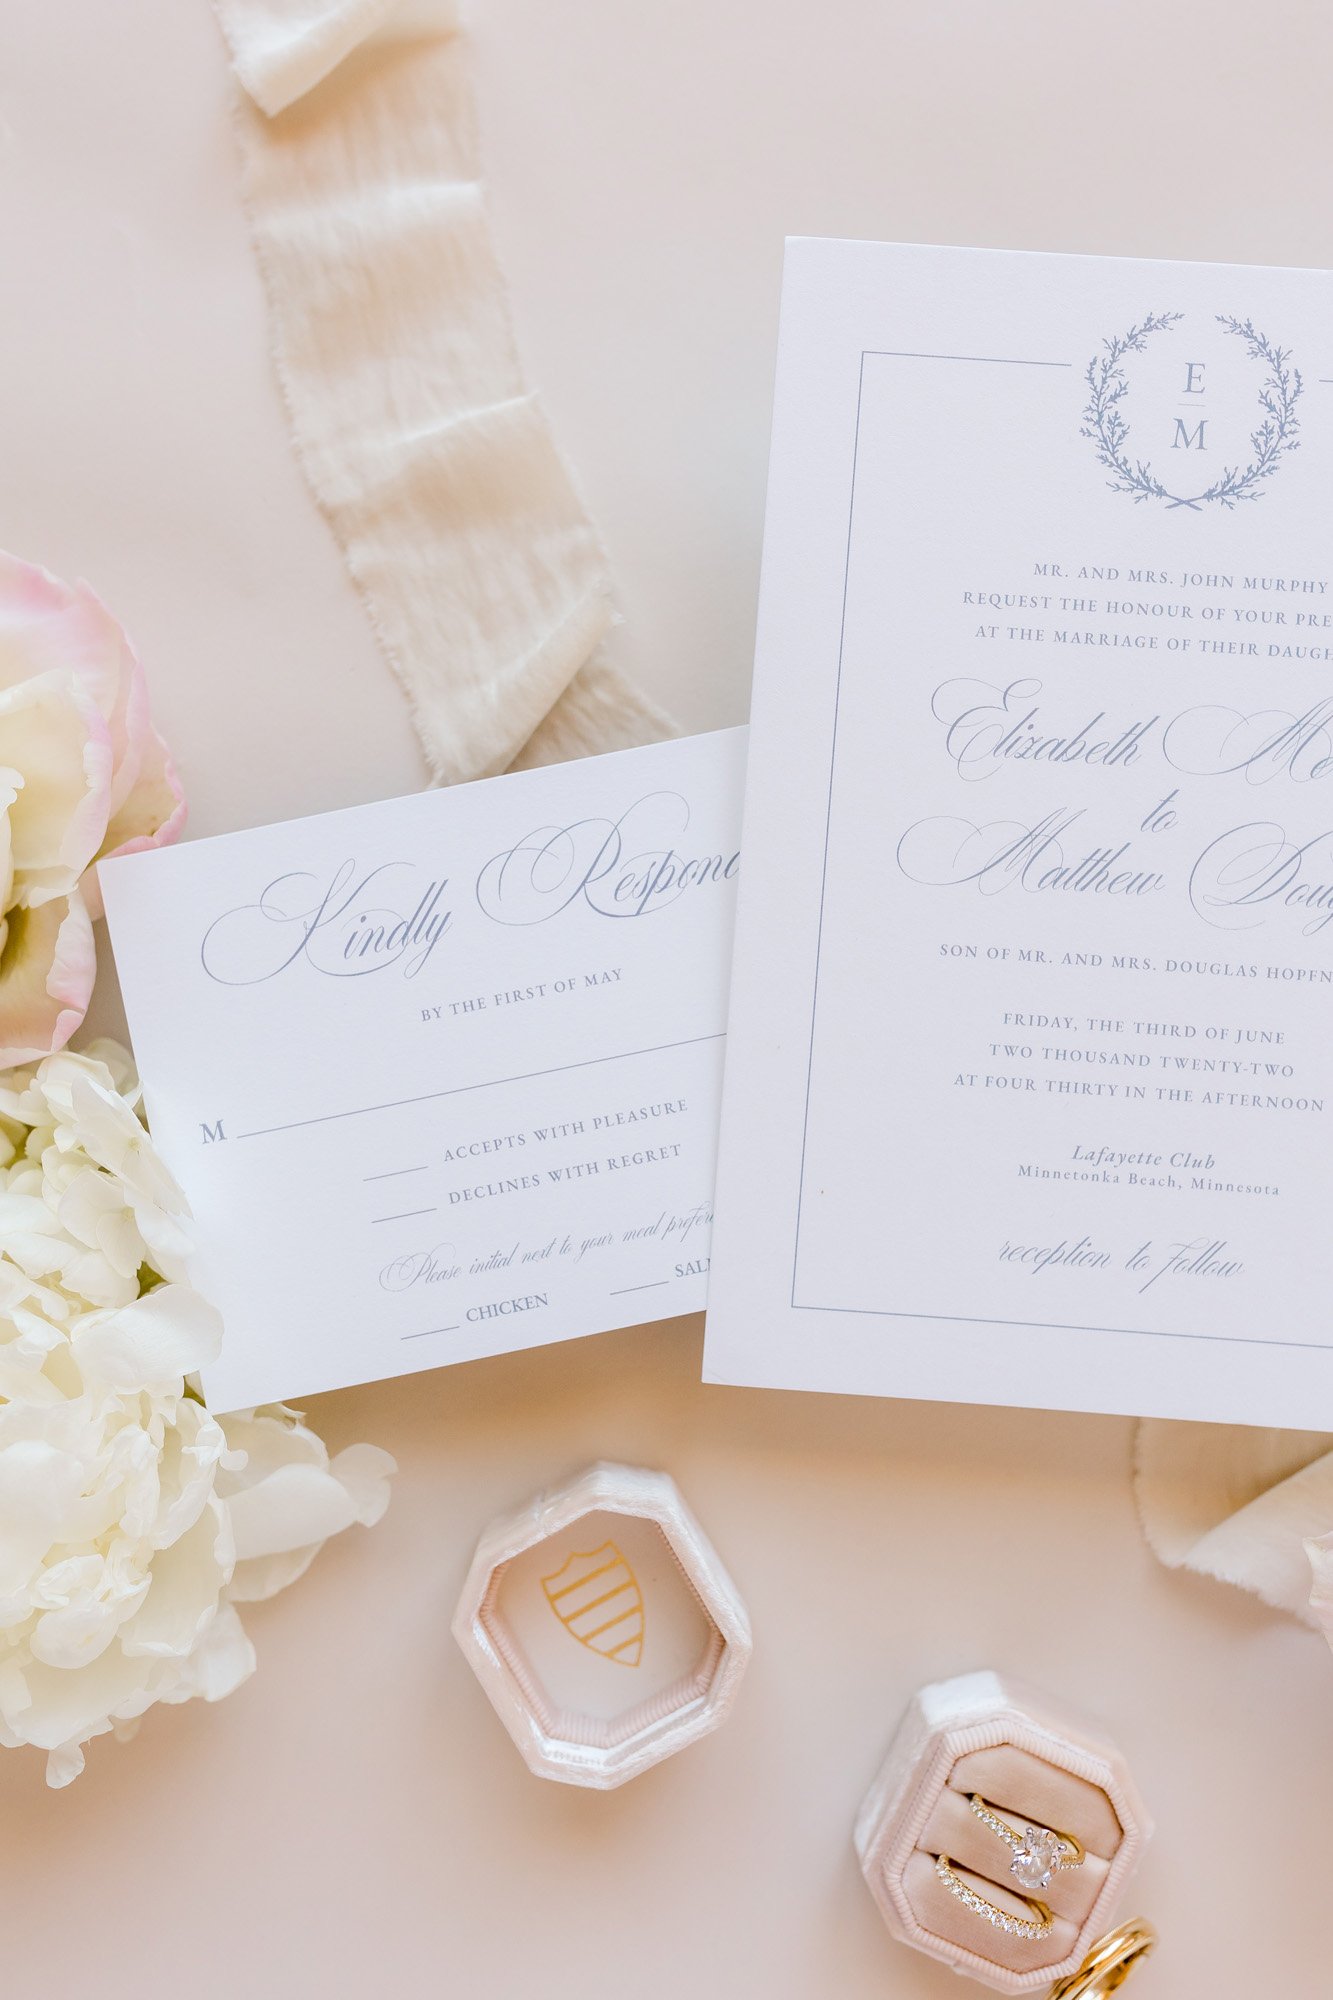  Traditional wedding invitations in white and blue with classic calligraphy surrounded by blush silk ribbons and rose petals 